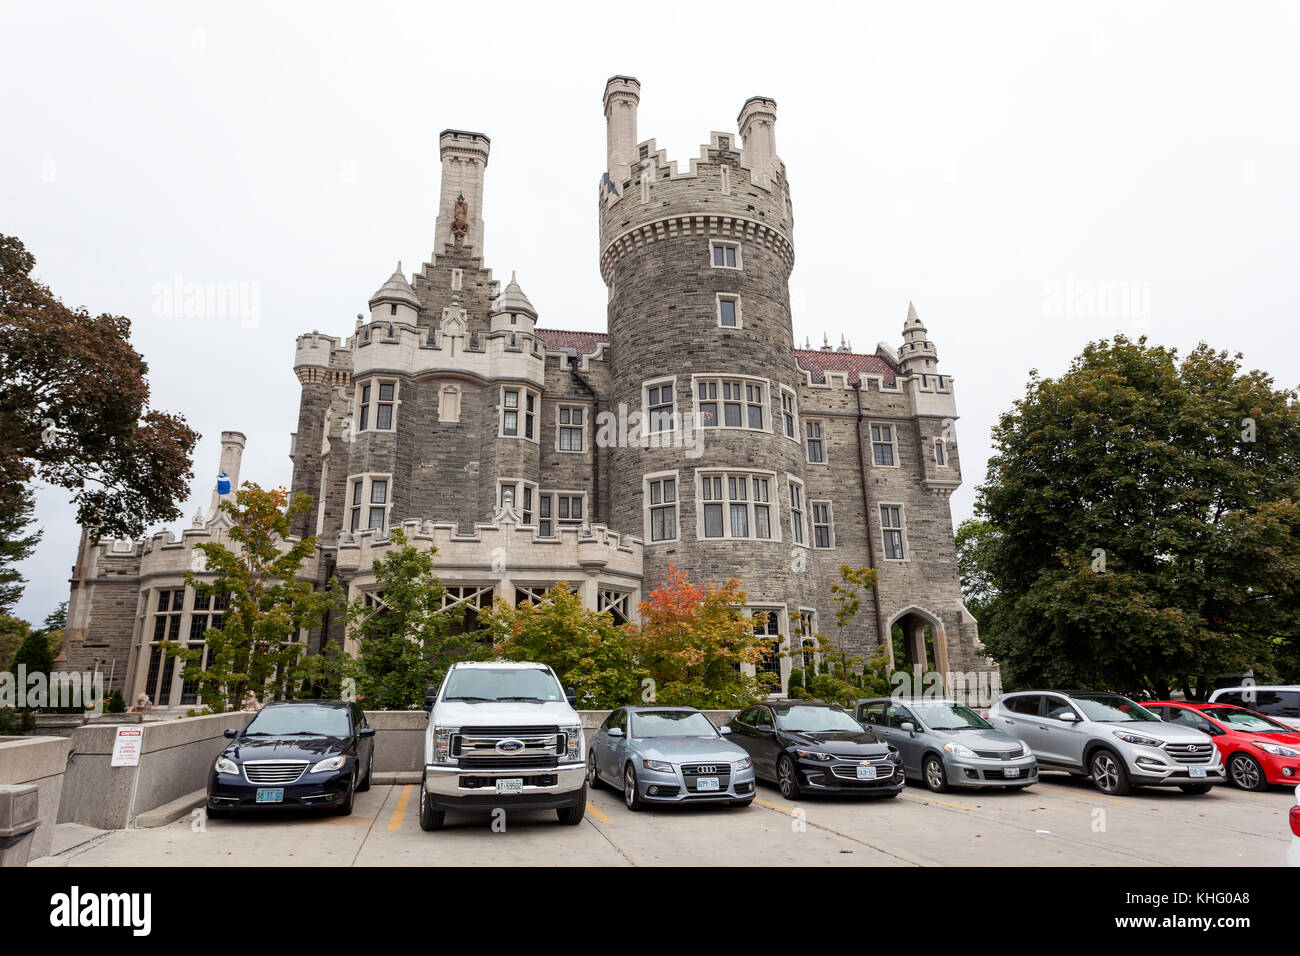 Toronto, Canada - Oct 12, 2017: Exterior view of the Casa Loma - a gothic style house and museum in Toronto. Province of Ontario, Canada Stock Photo